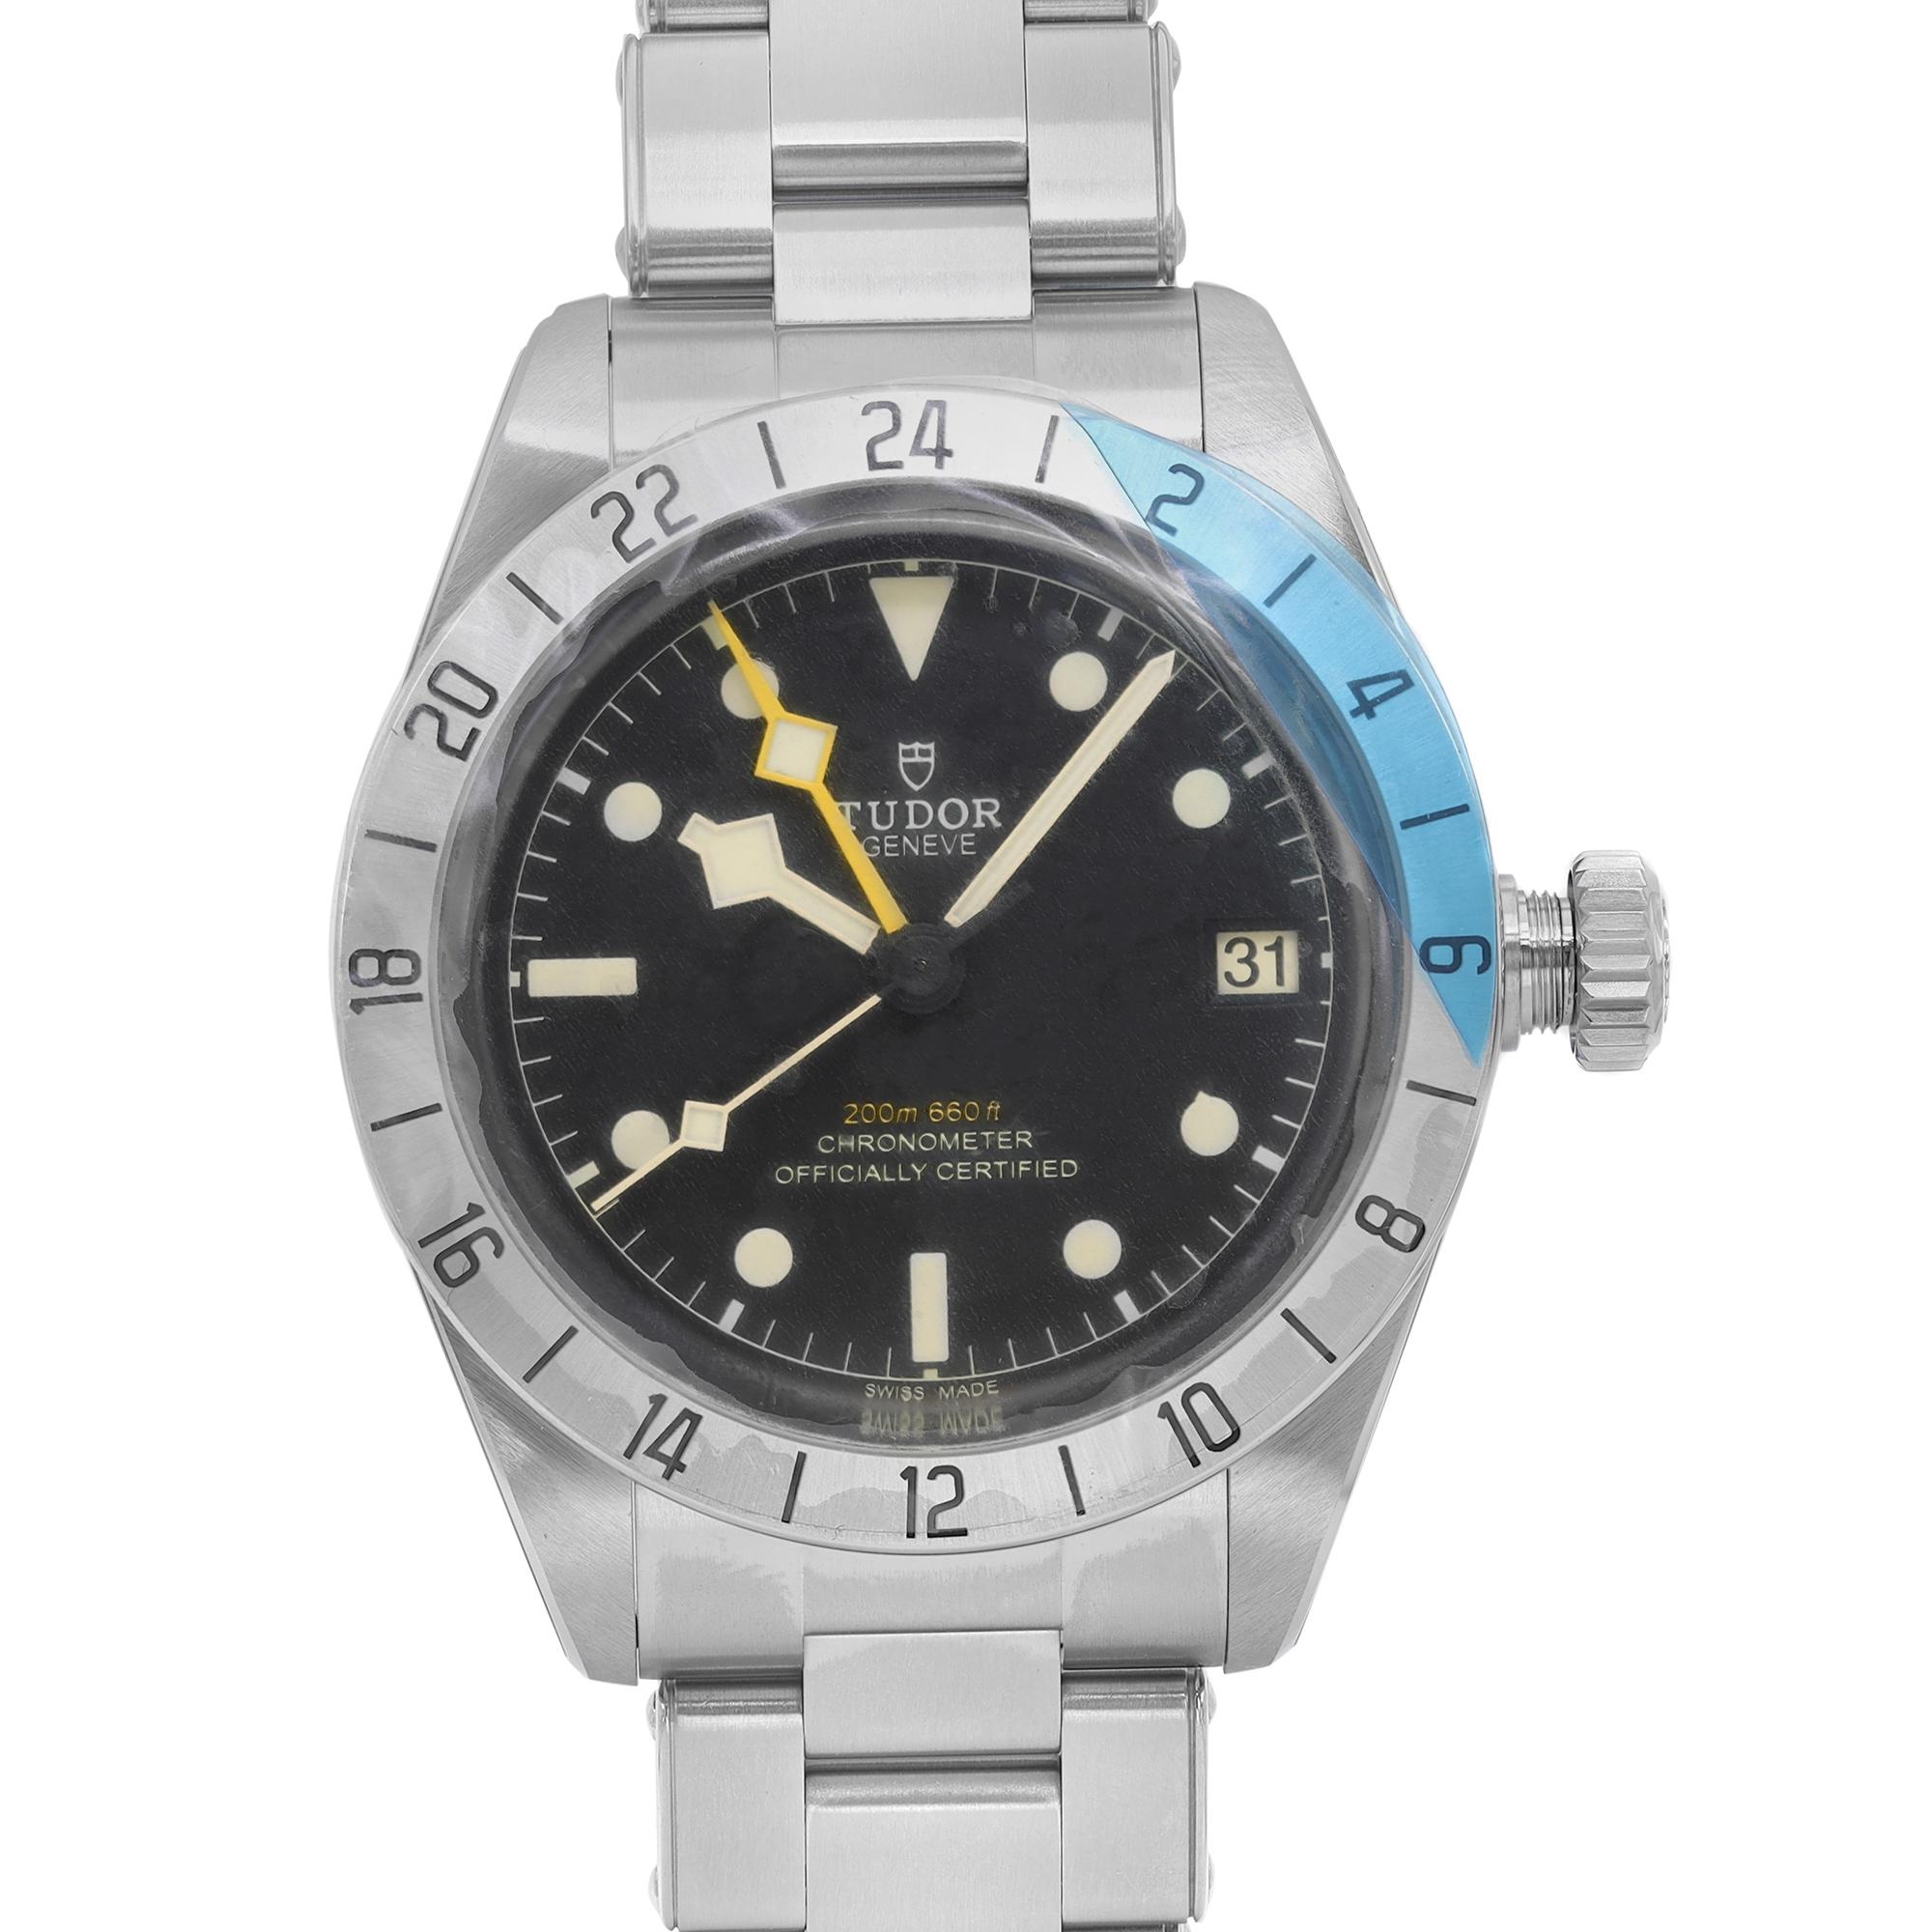 Unworn Tudor Black Bay Pro Men's Watch M79470-0001. This Beautiful Timepiece is Powered by Mechanical (Automatic) Movement And Features: Round Stainless Steel Case with a Stainless Steel Bracelet. 24-hour graduated fixed bezel in satin-brushed